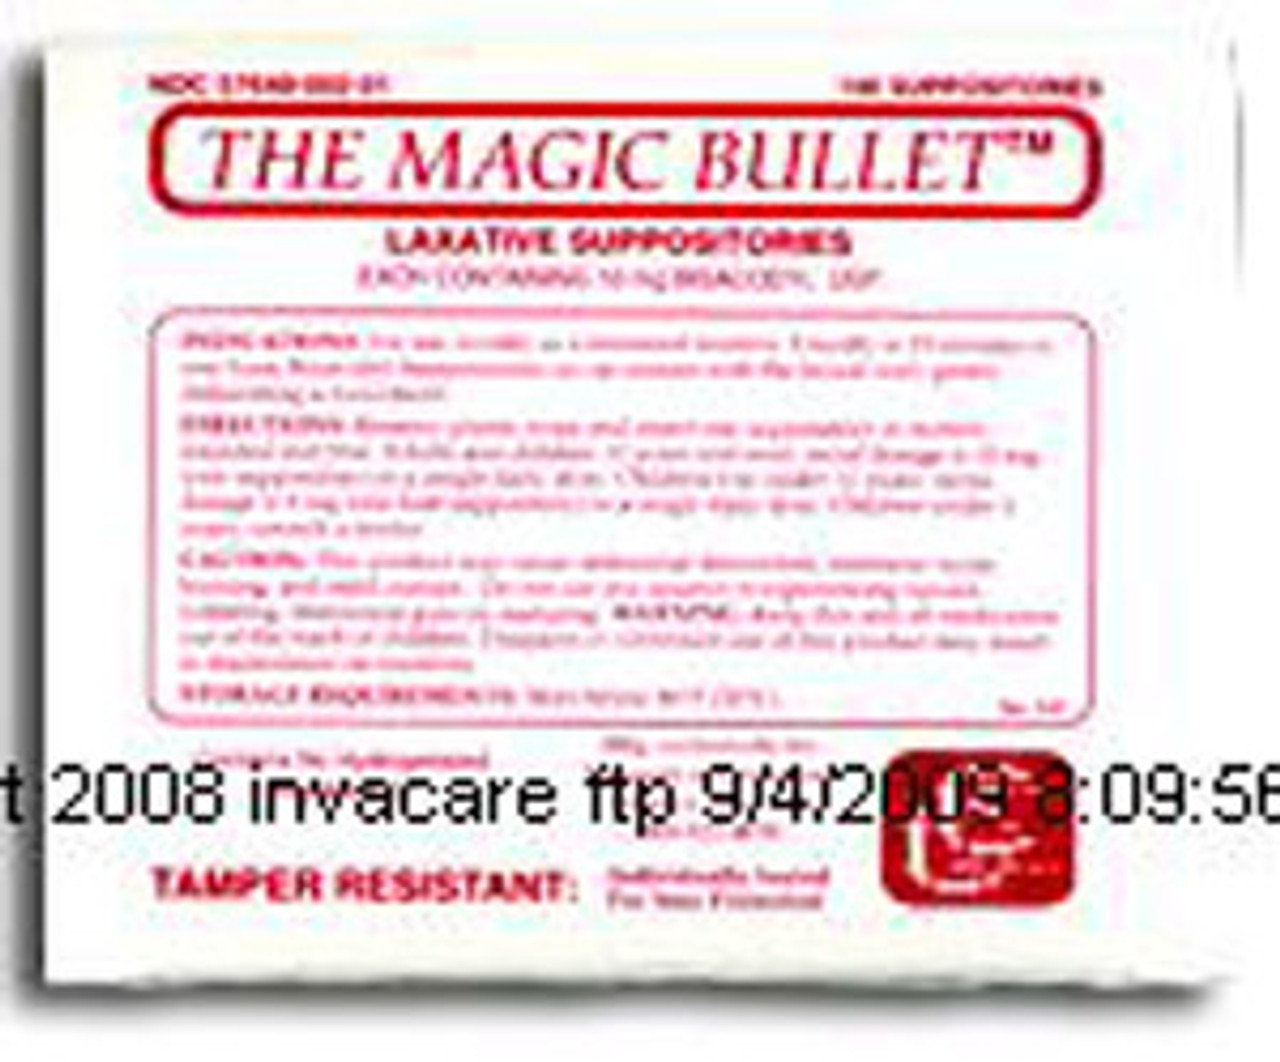 Magic Bullet Suppository